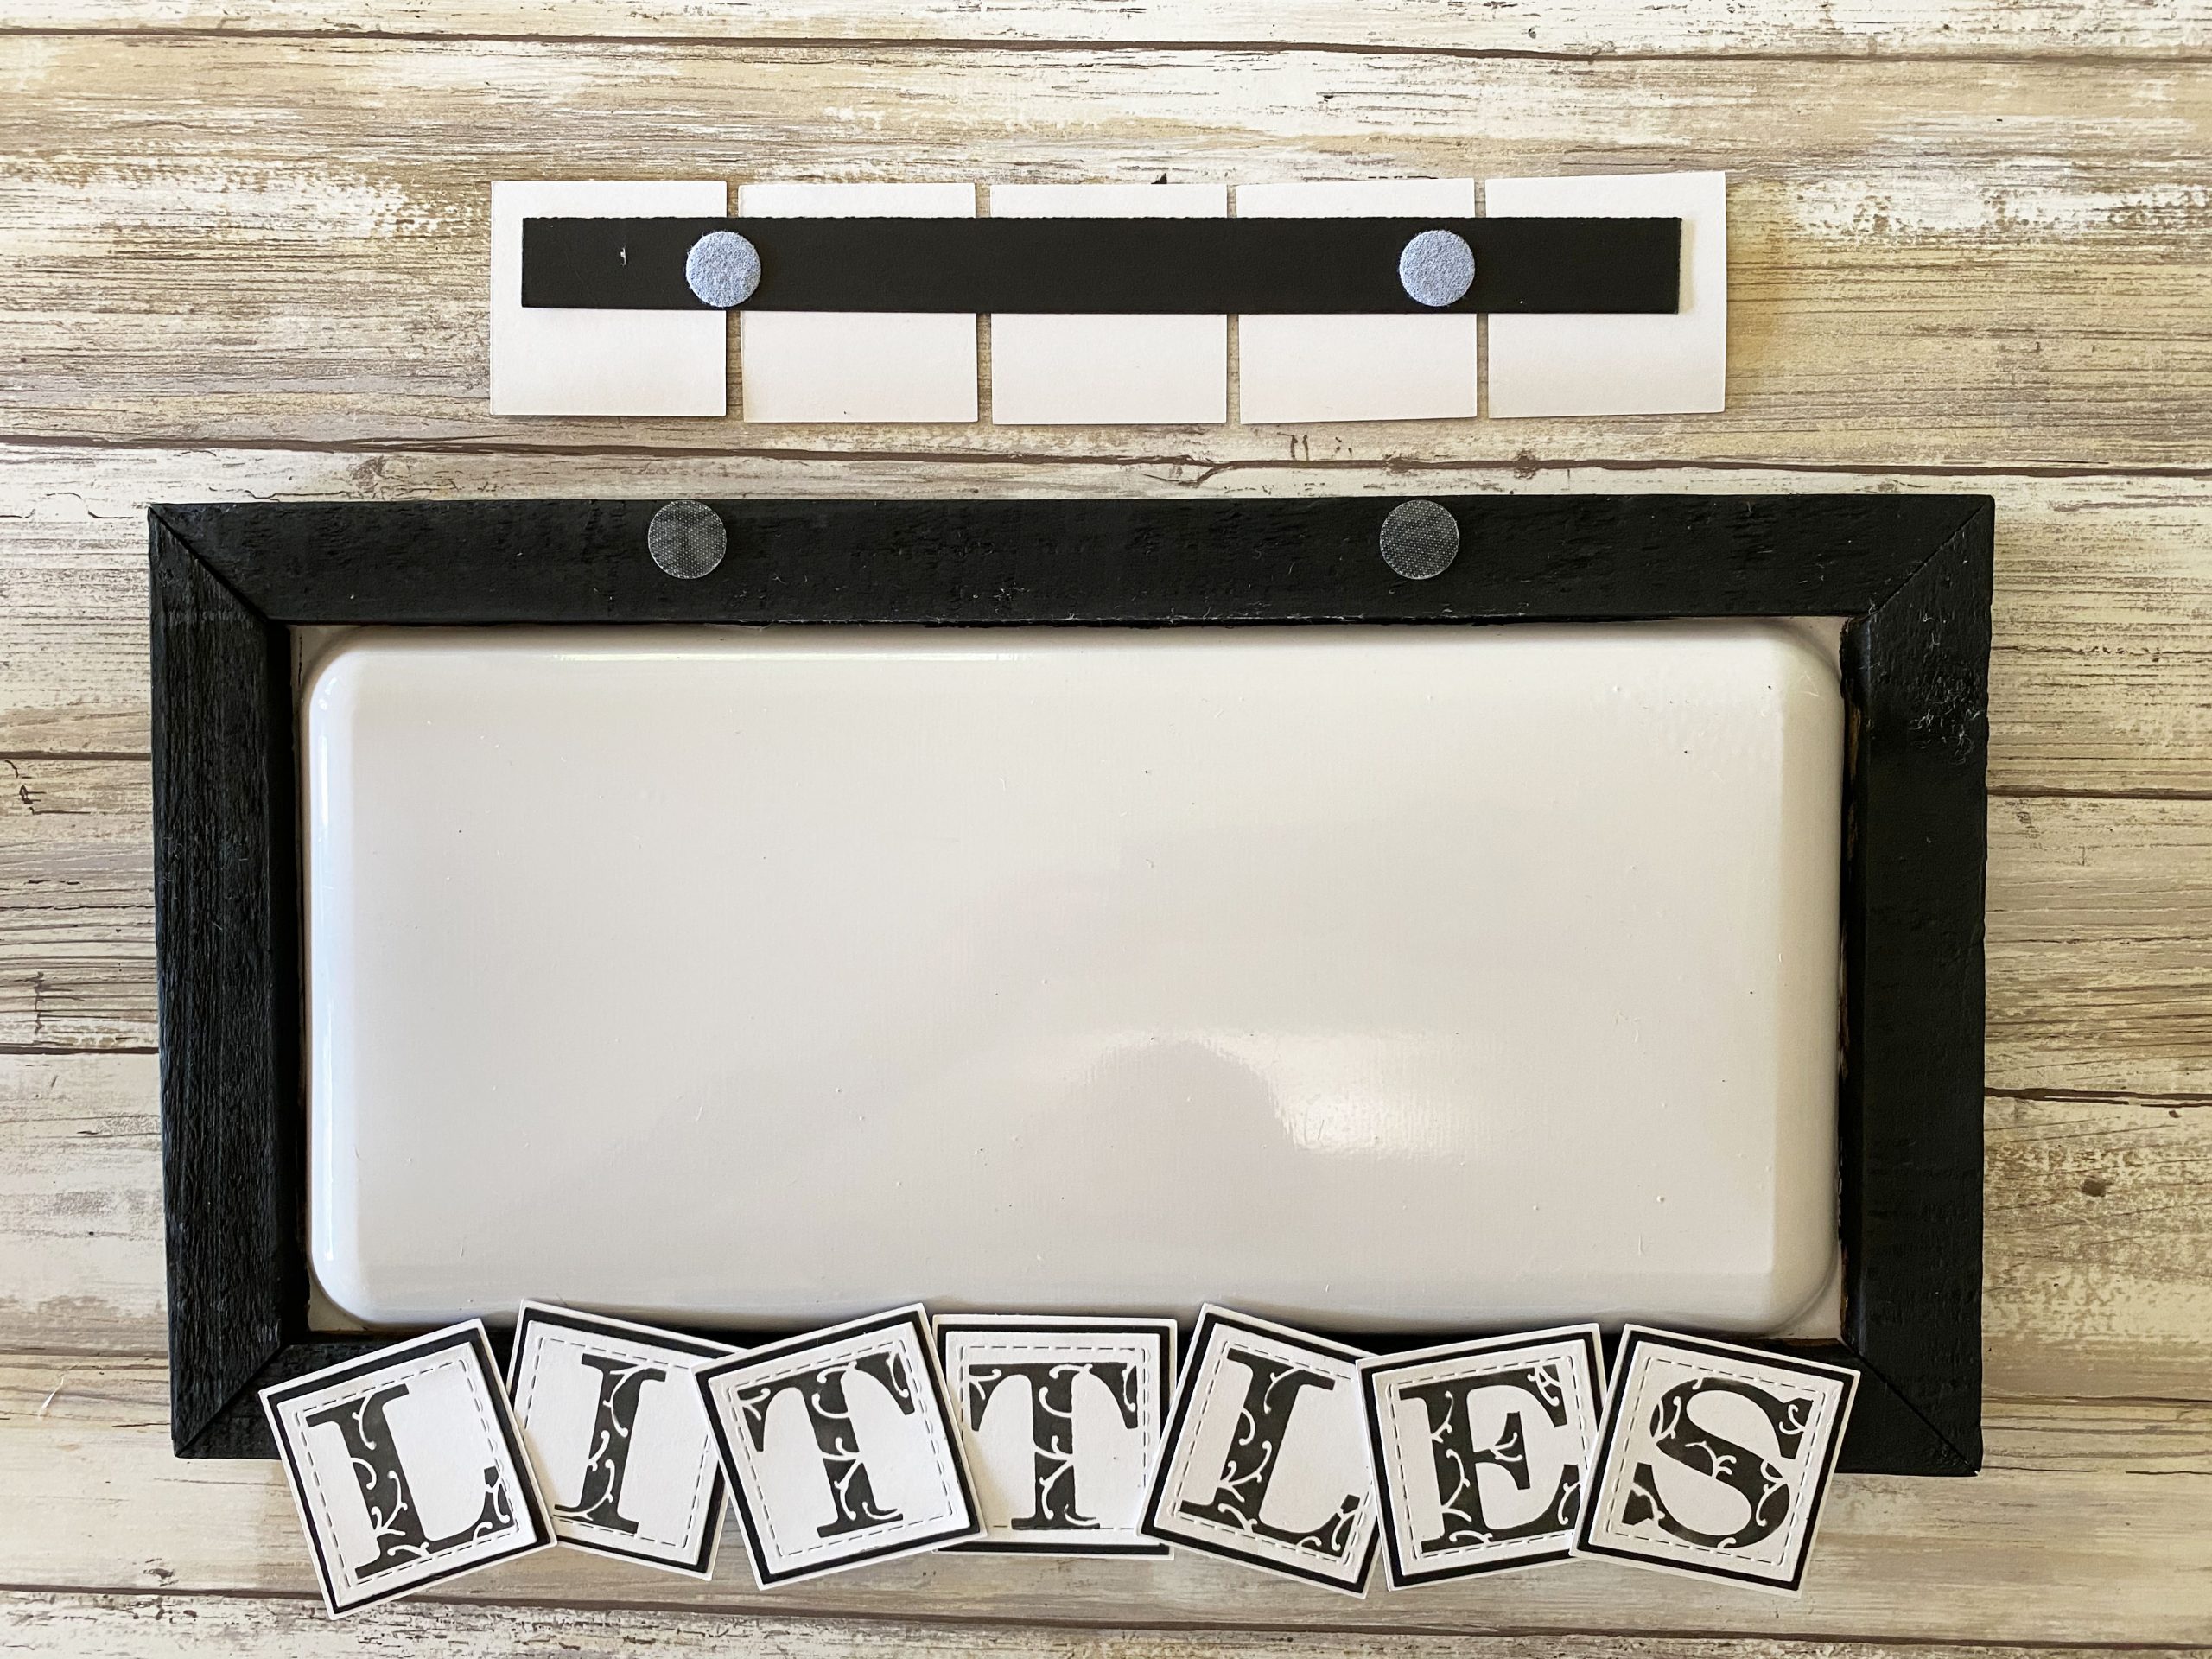 Attach the stenciled letters onto the chip board for the changeable stenciled display frame